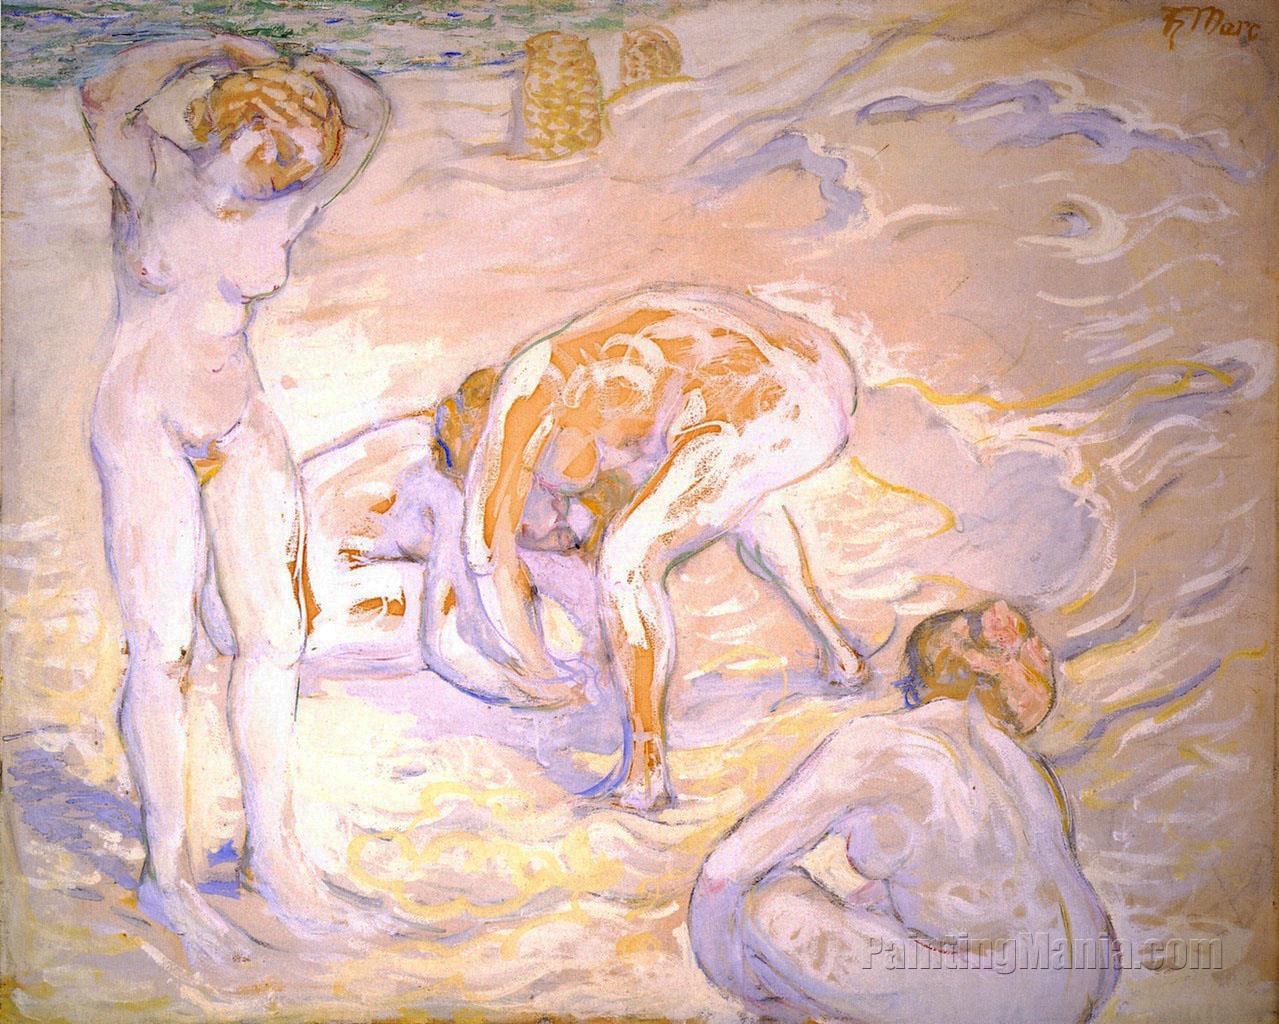 Composition with Nudes I